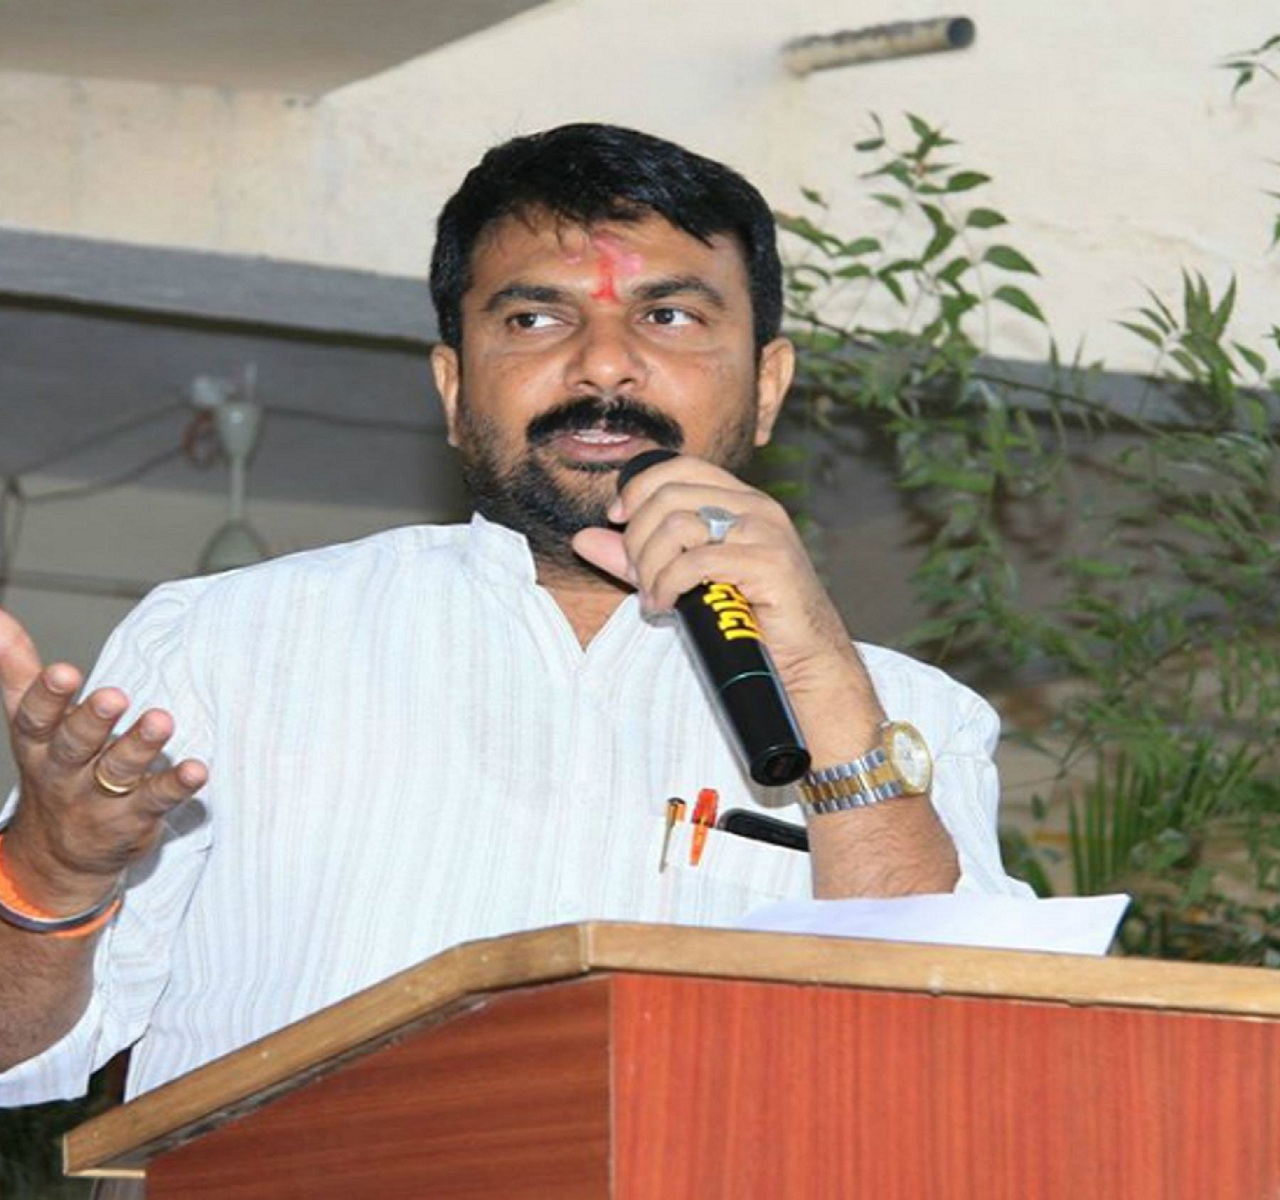 Rally expenses should be used for the welfare of farmers, suicides will stop: Patil